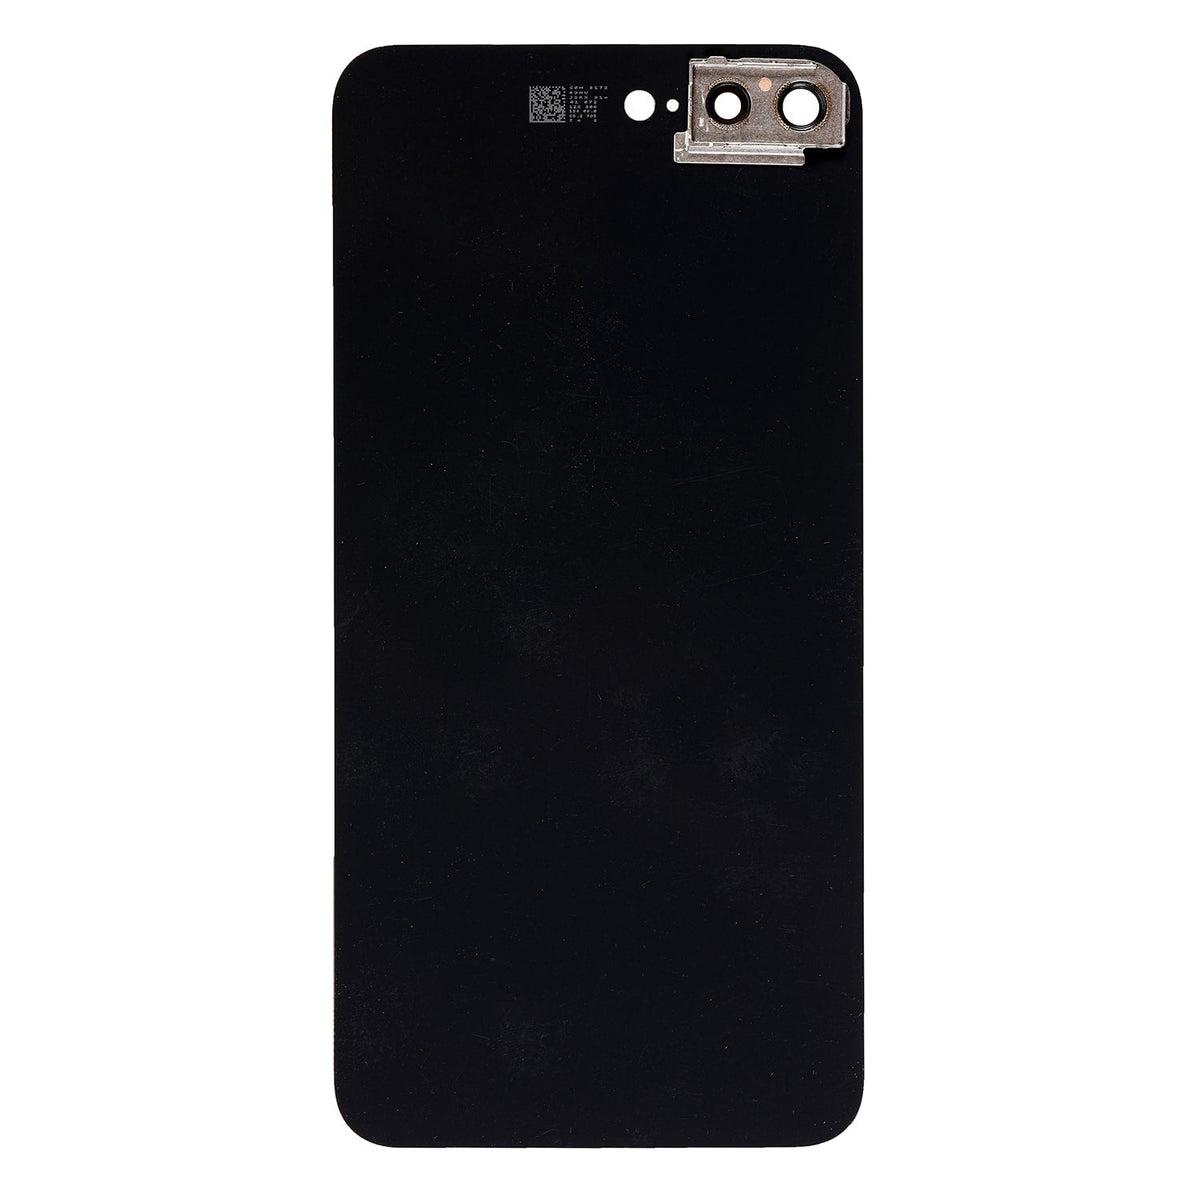 SILVER BACK COVER WITH CAMERA HOLDER FOR IPHONE 8 PLUS